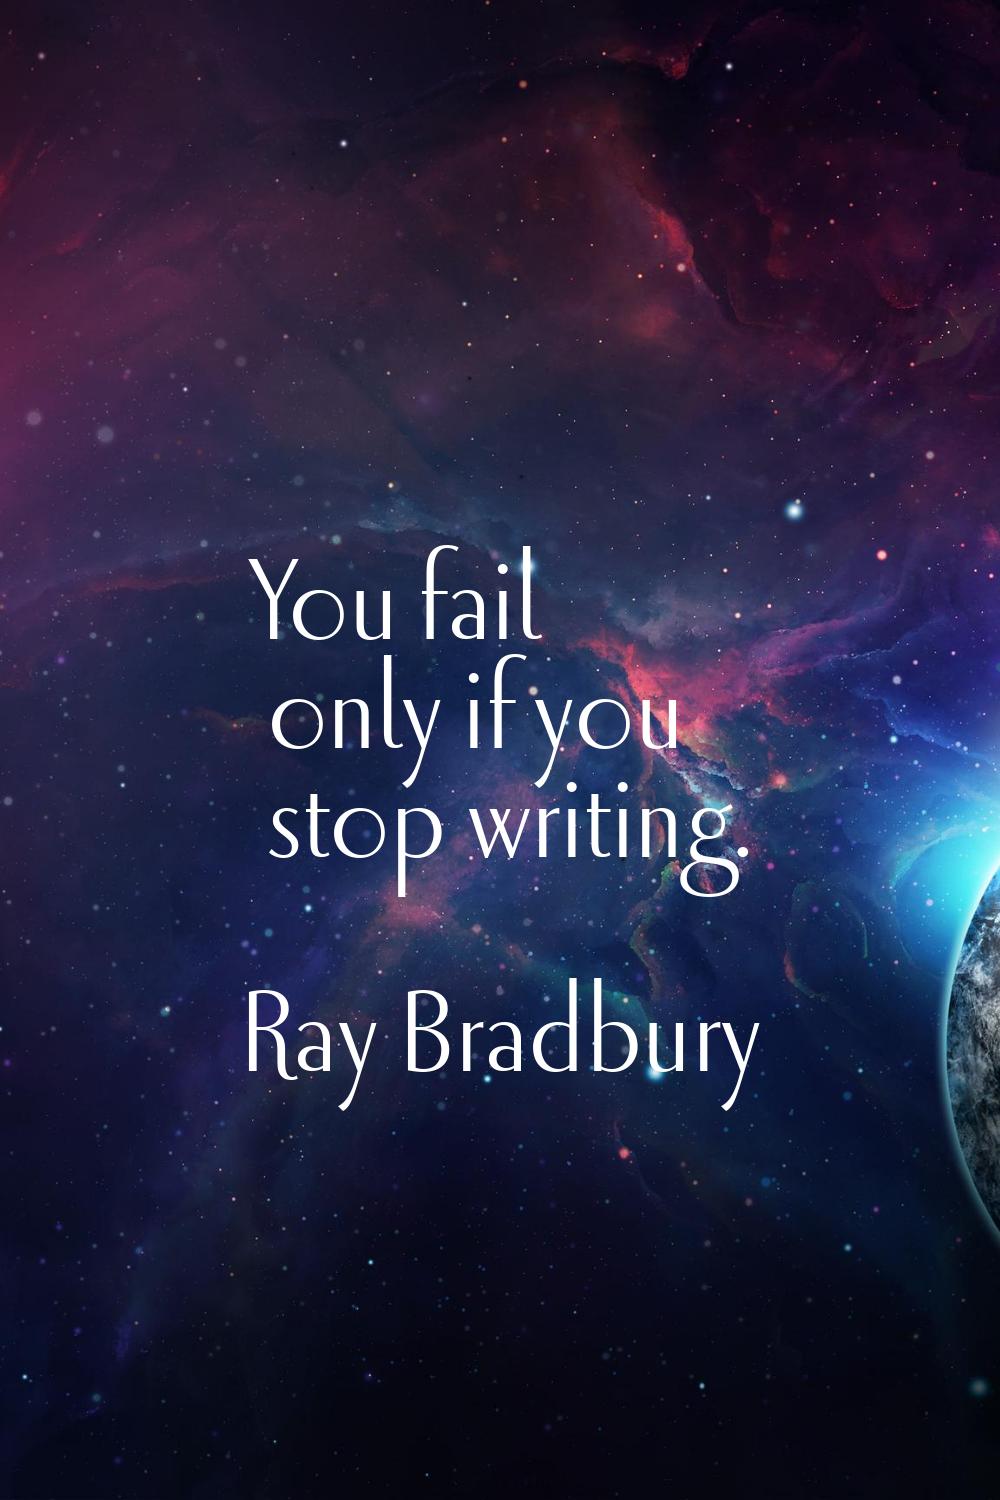 You fail only if you stop writing.